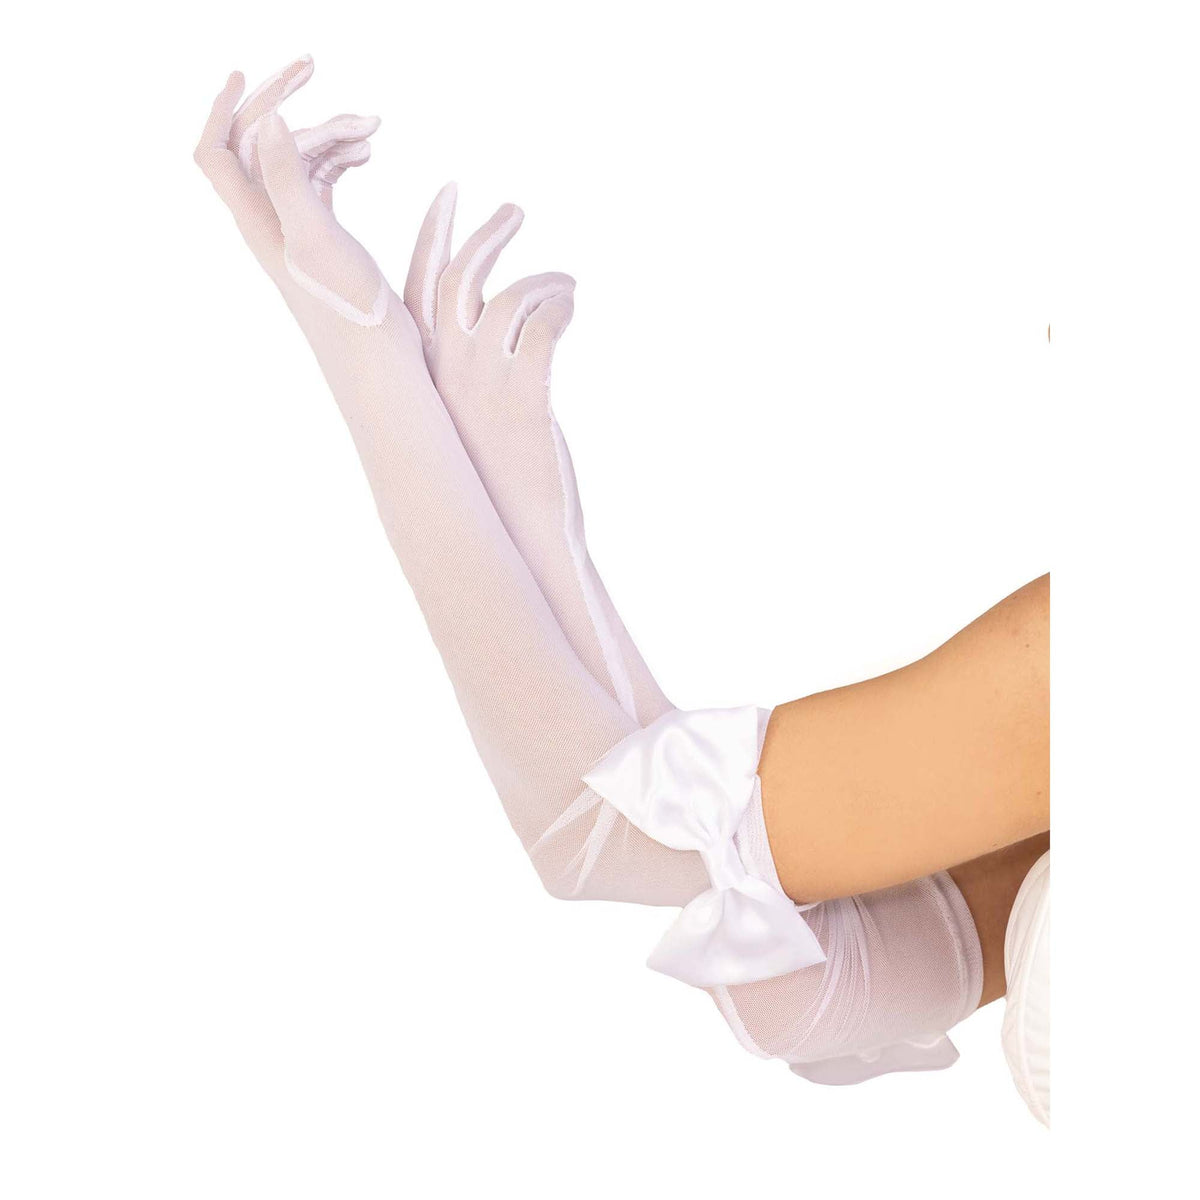 LEG AVENUE/SKU DISTRIBUTORS INC Costume Accessories White Opera Gloves With Bows for Adults, 1 Count 714718566757